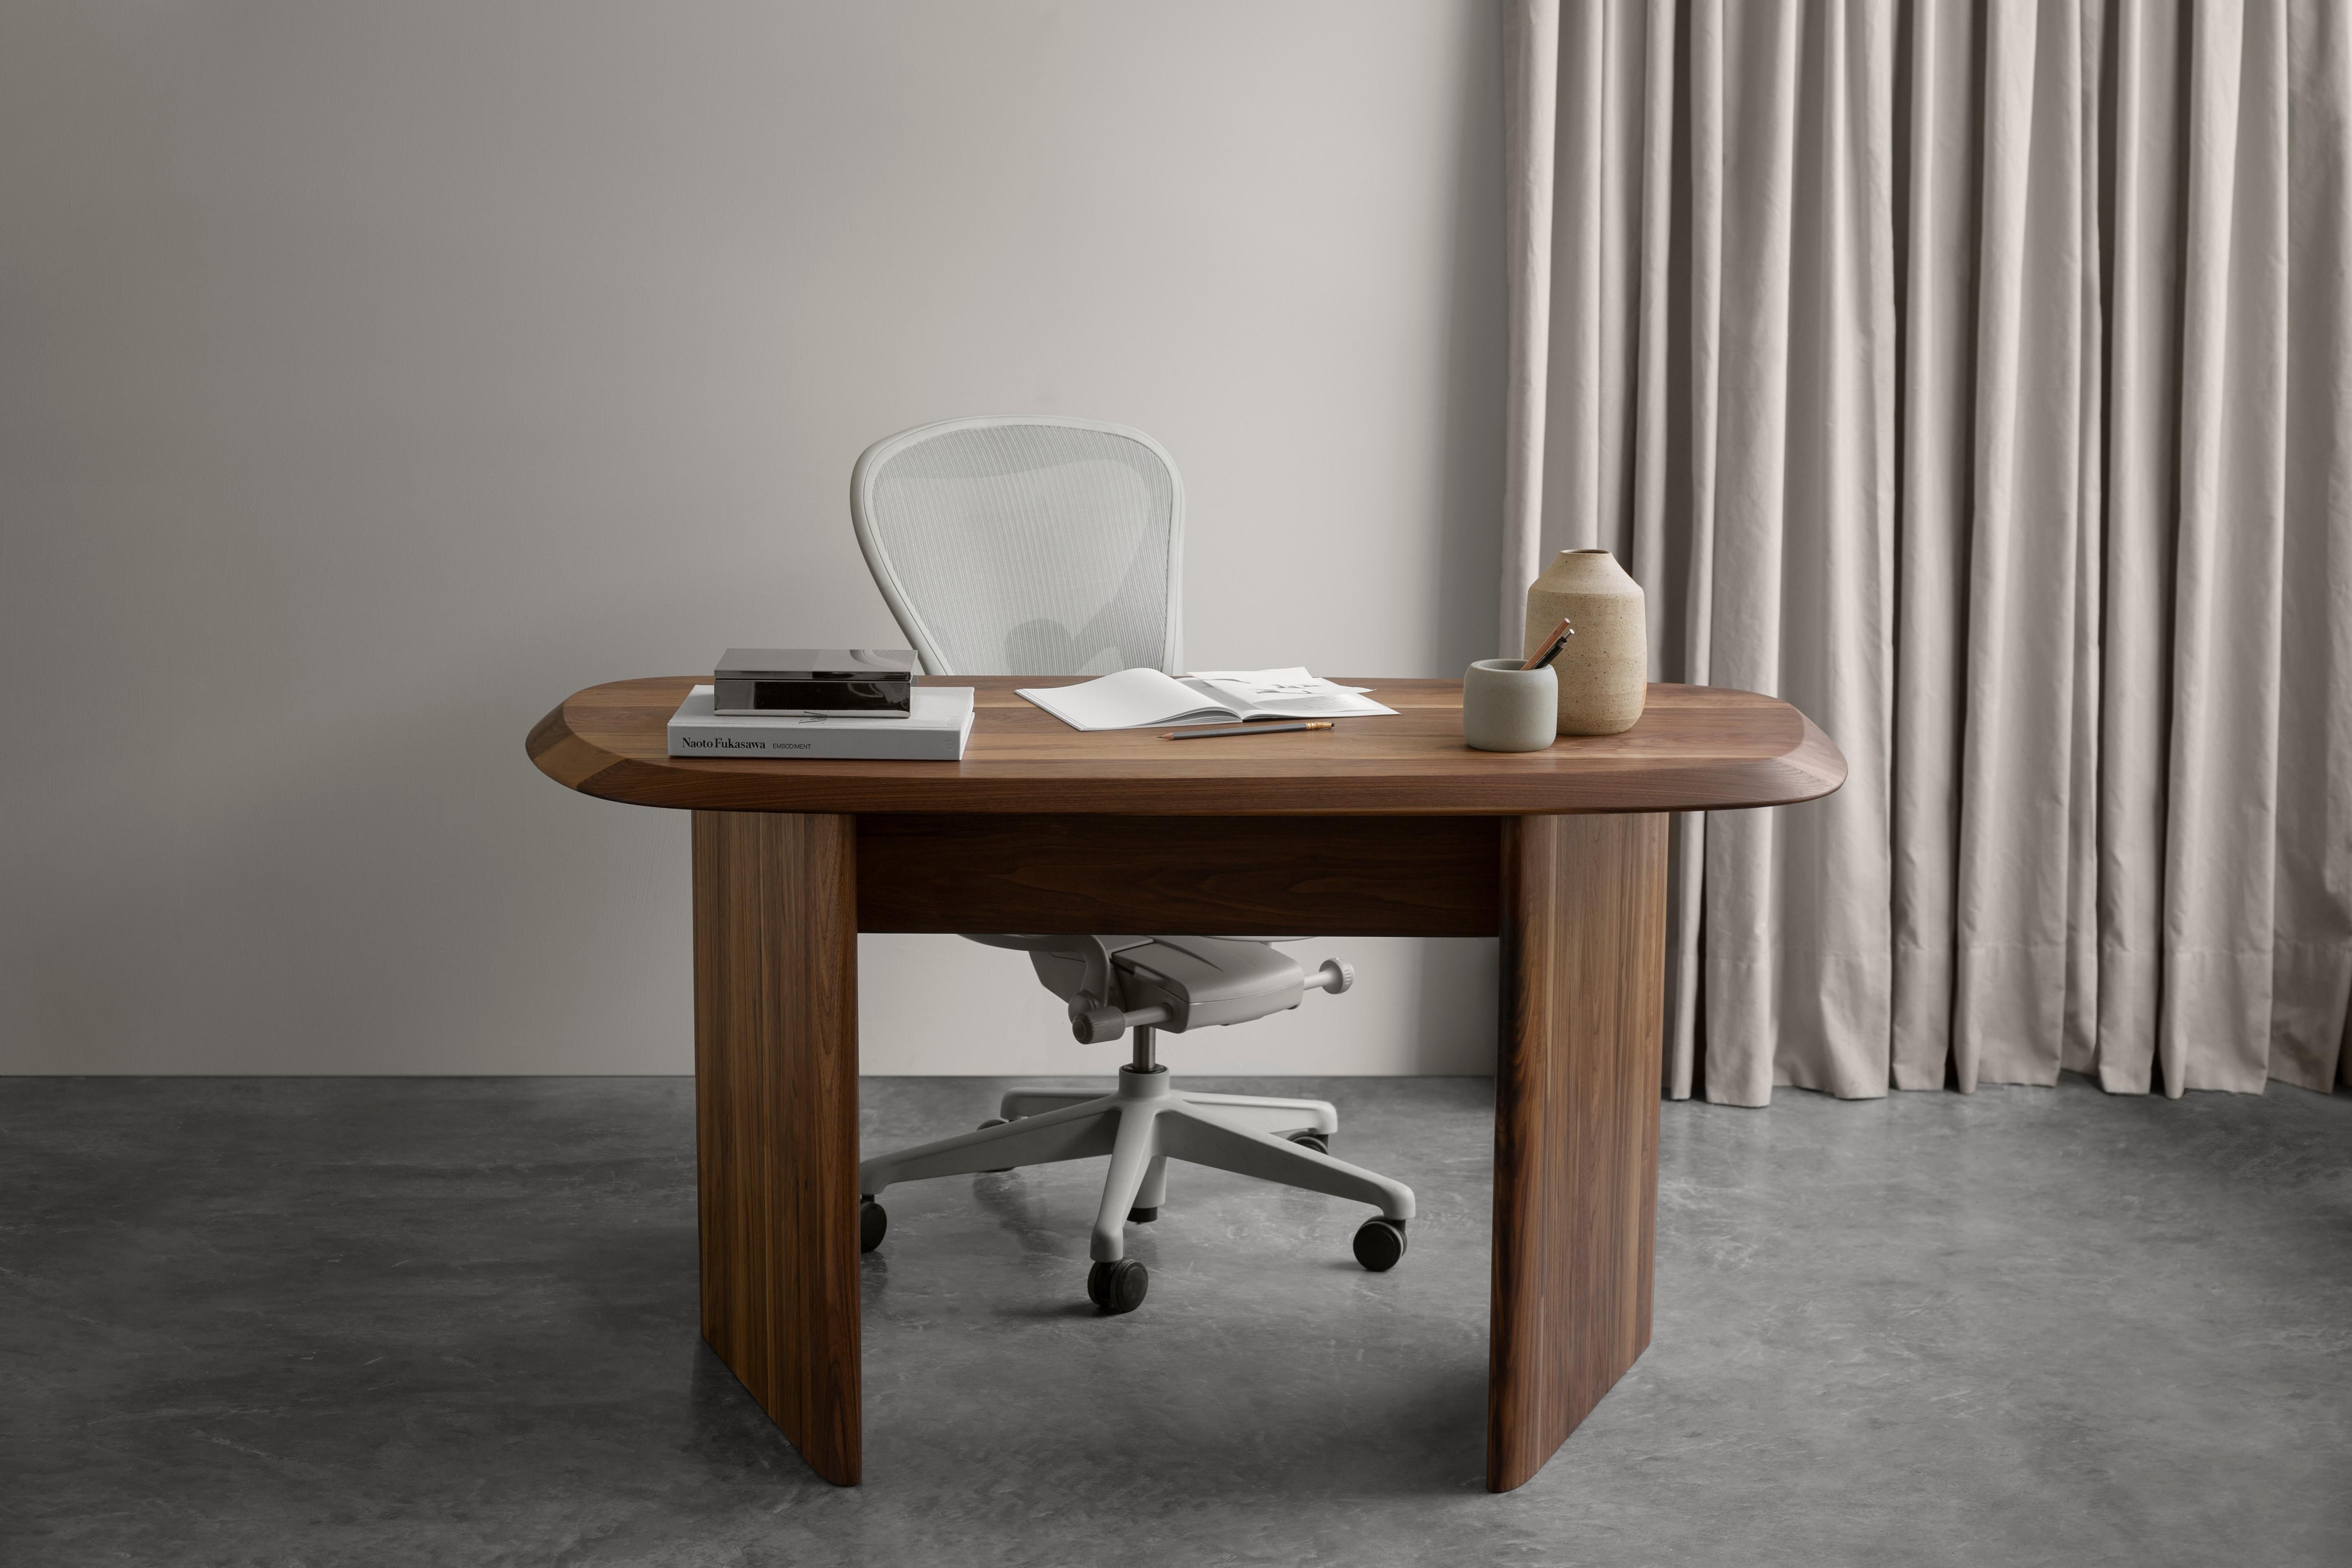 Duna Desk in Solid Walnut Wood, Home Office Writing Desk by Joel Escalona

Duna Collection is a set of wood tables and surfaces inspired by the vast sand dune regions of the world. These formations, full of sinuous fine lines created by the wind,